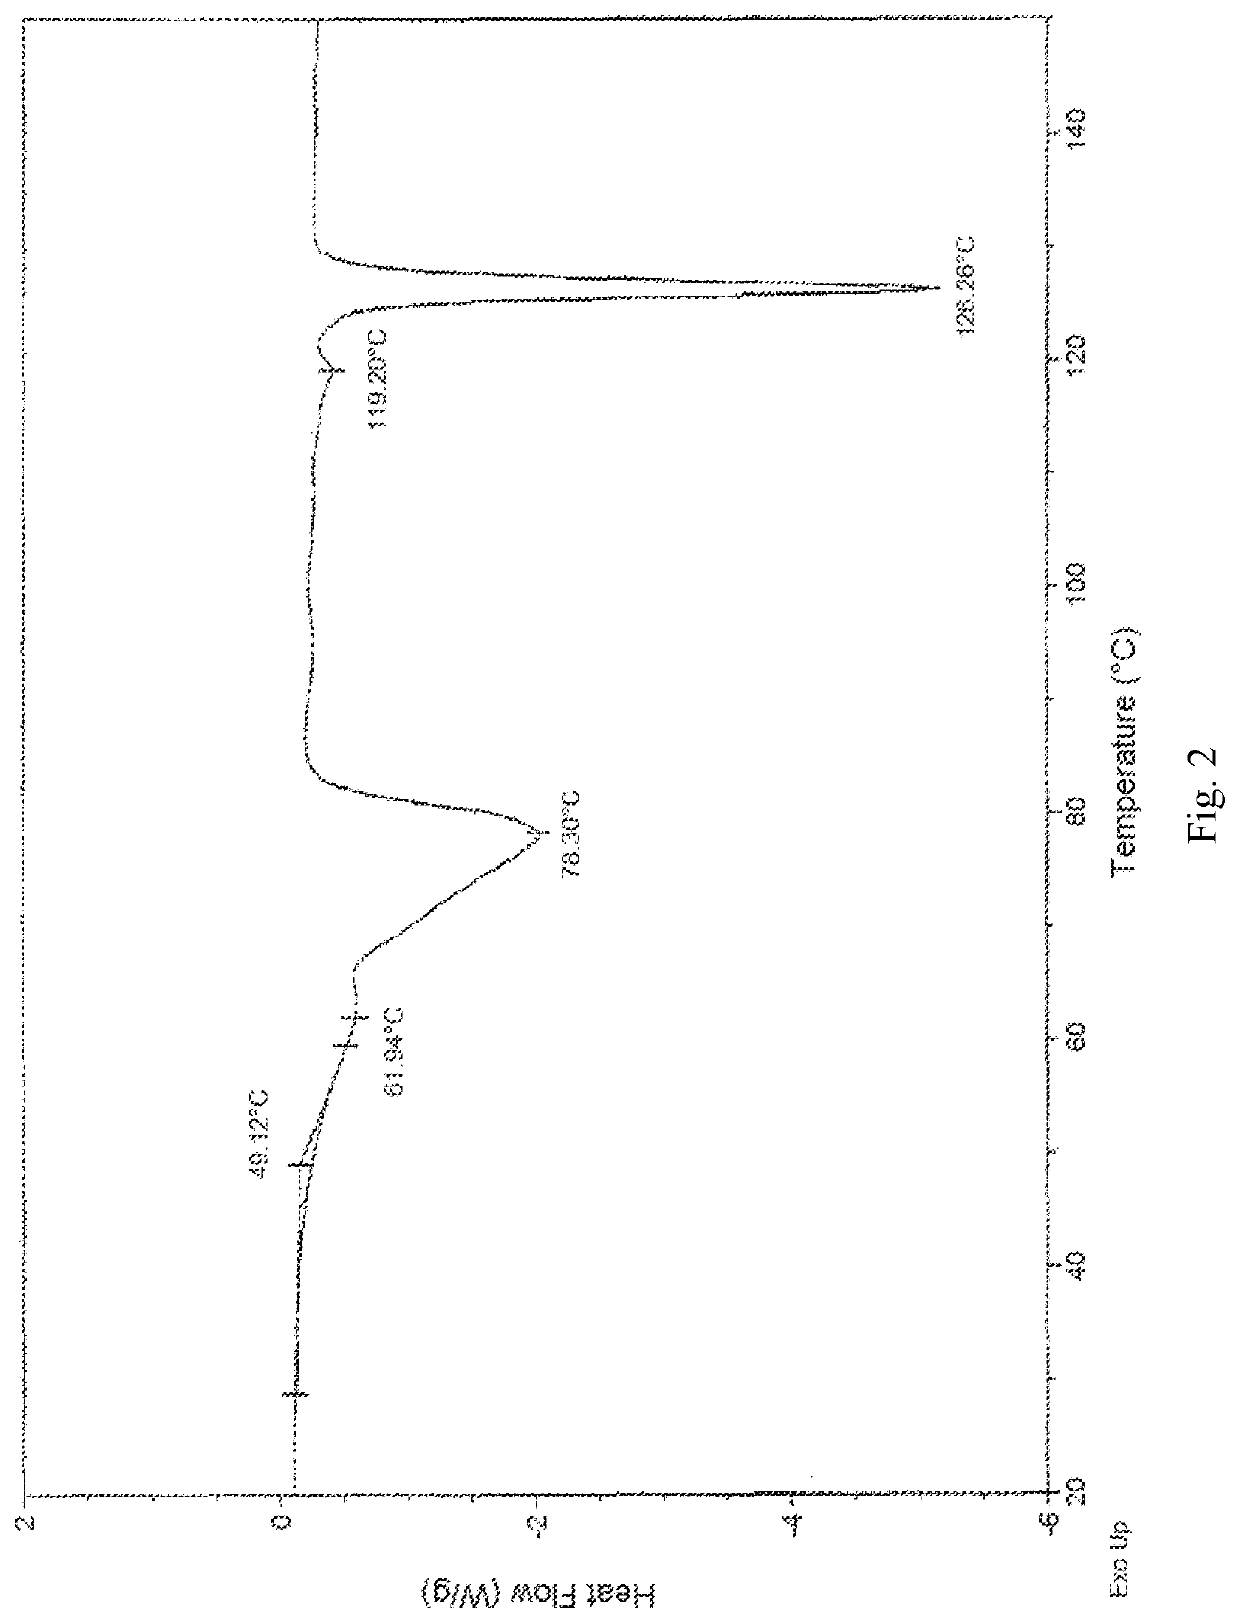 Treprostinil monohydrate crystals and methods for preparation thereof